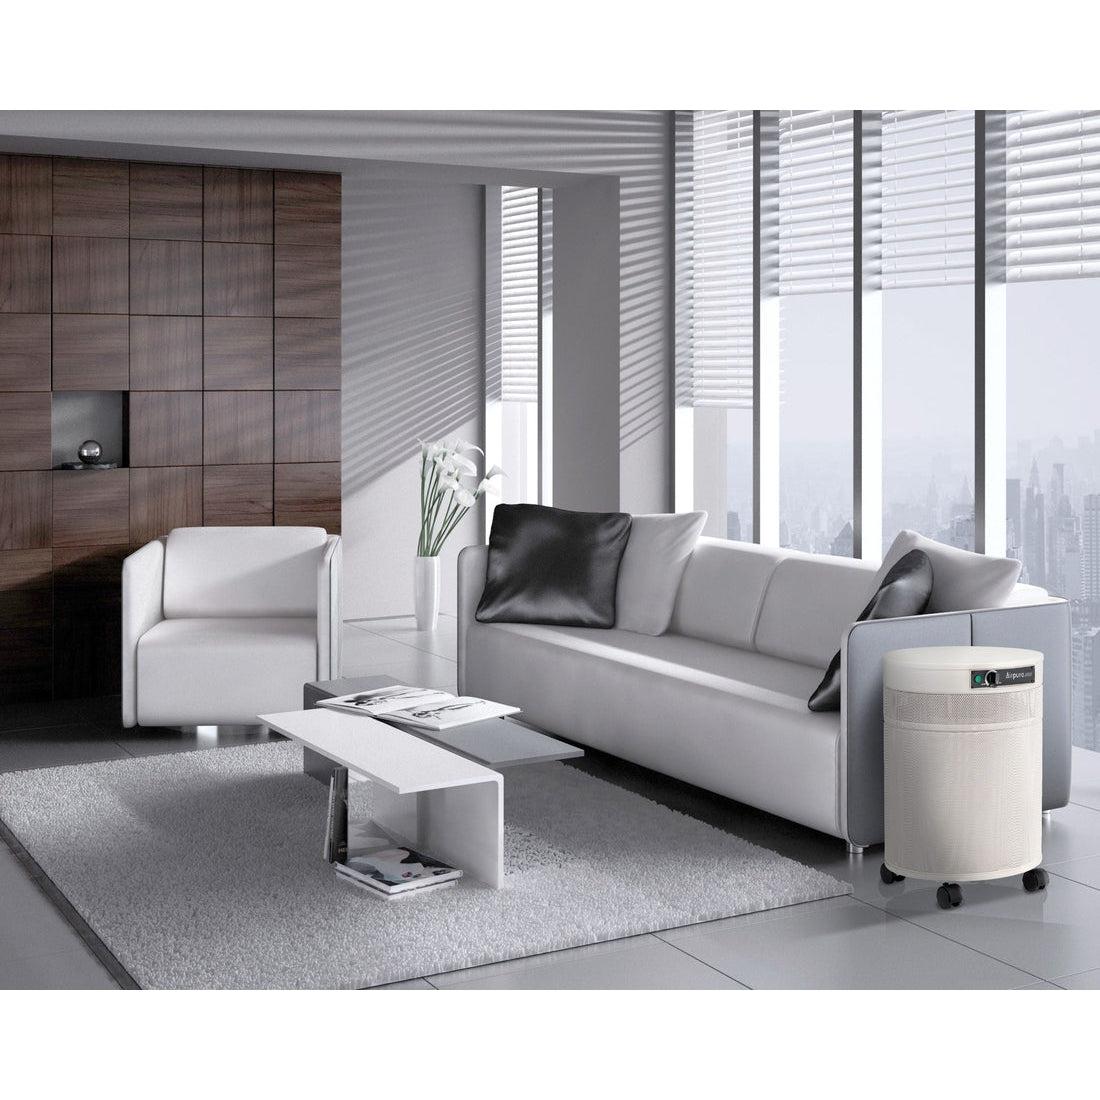 Airpura V700 Air Purifier - Purely Relaxation